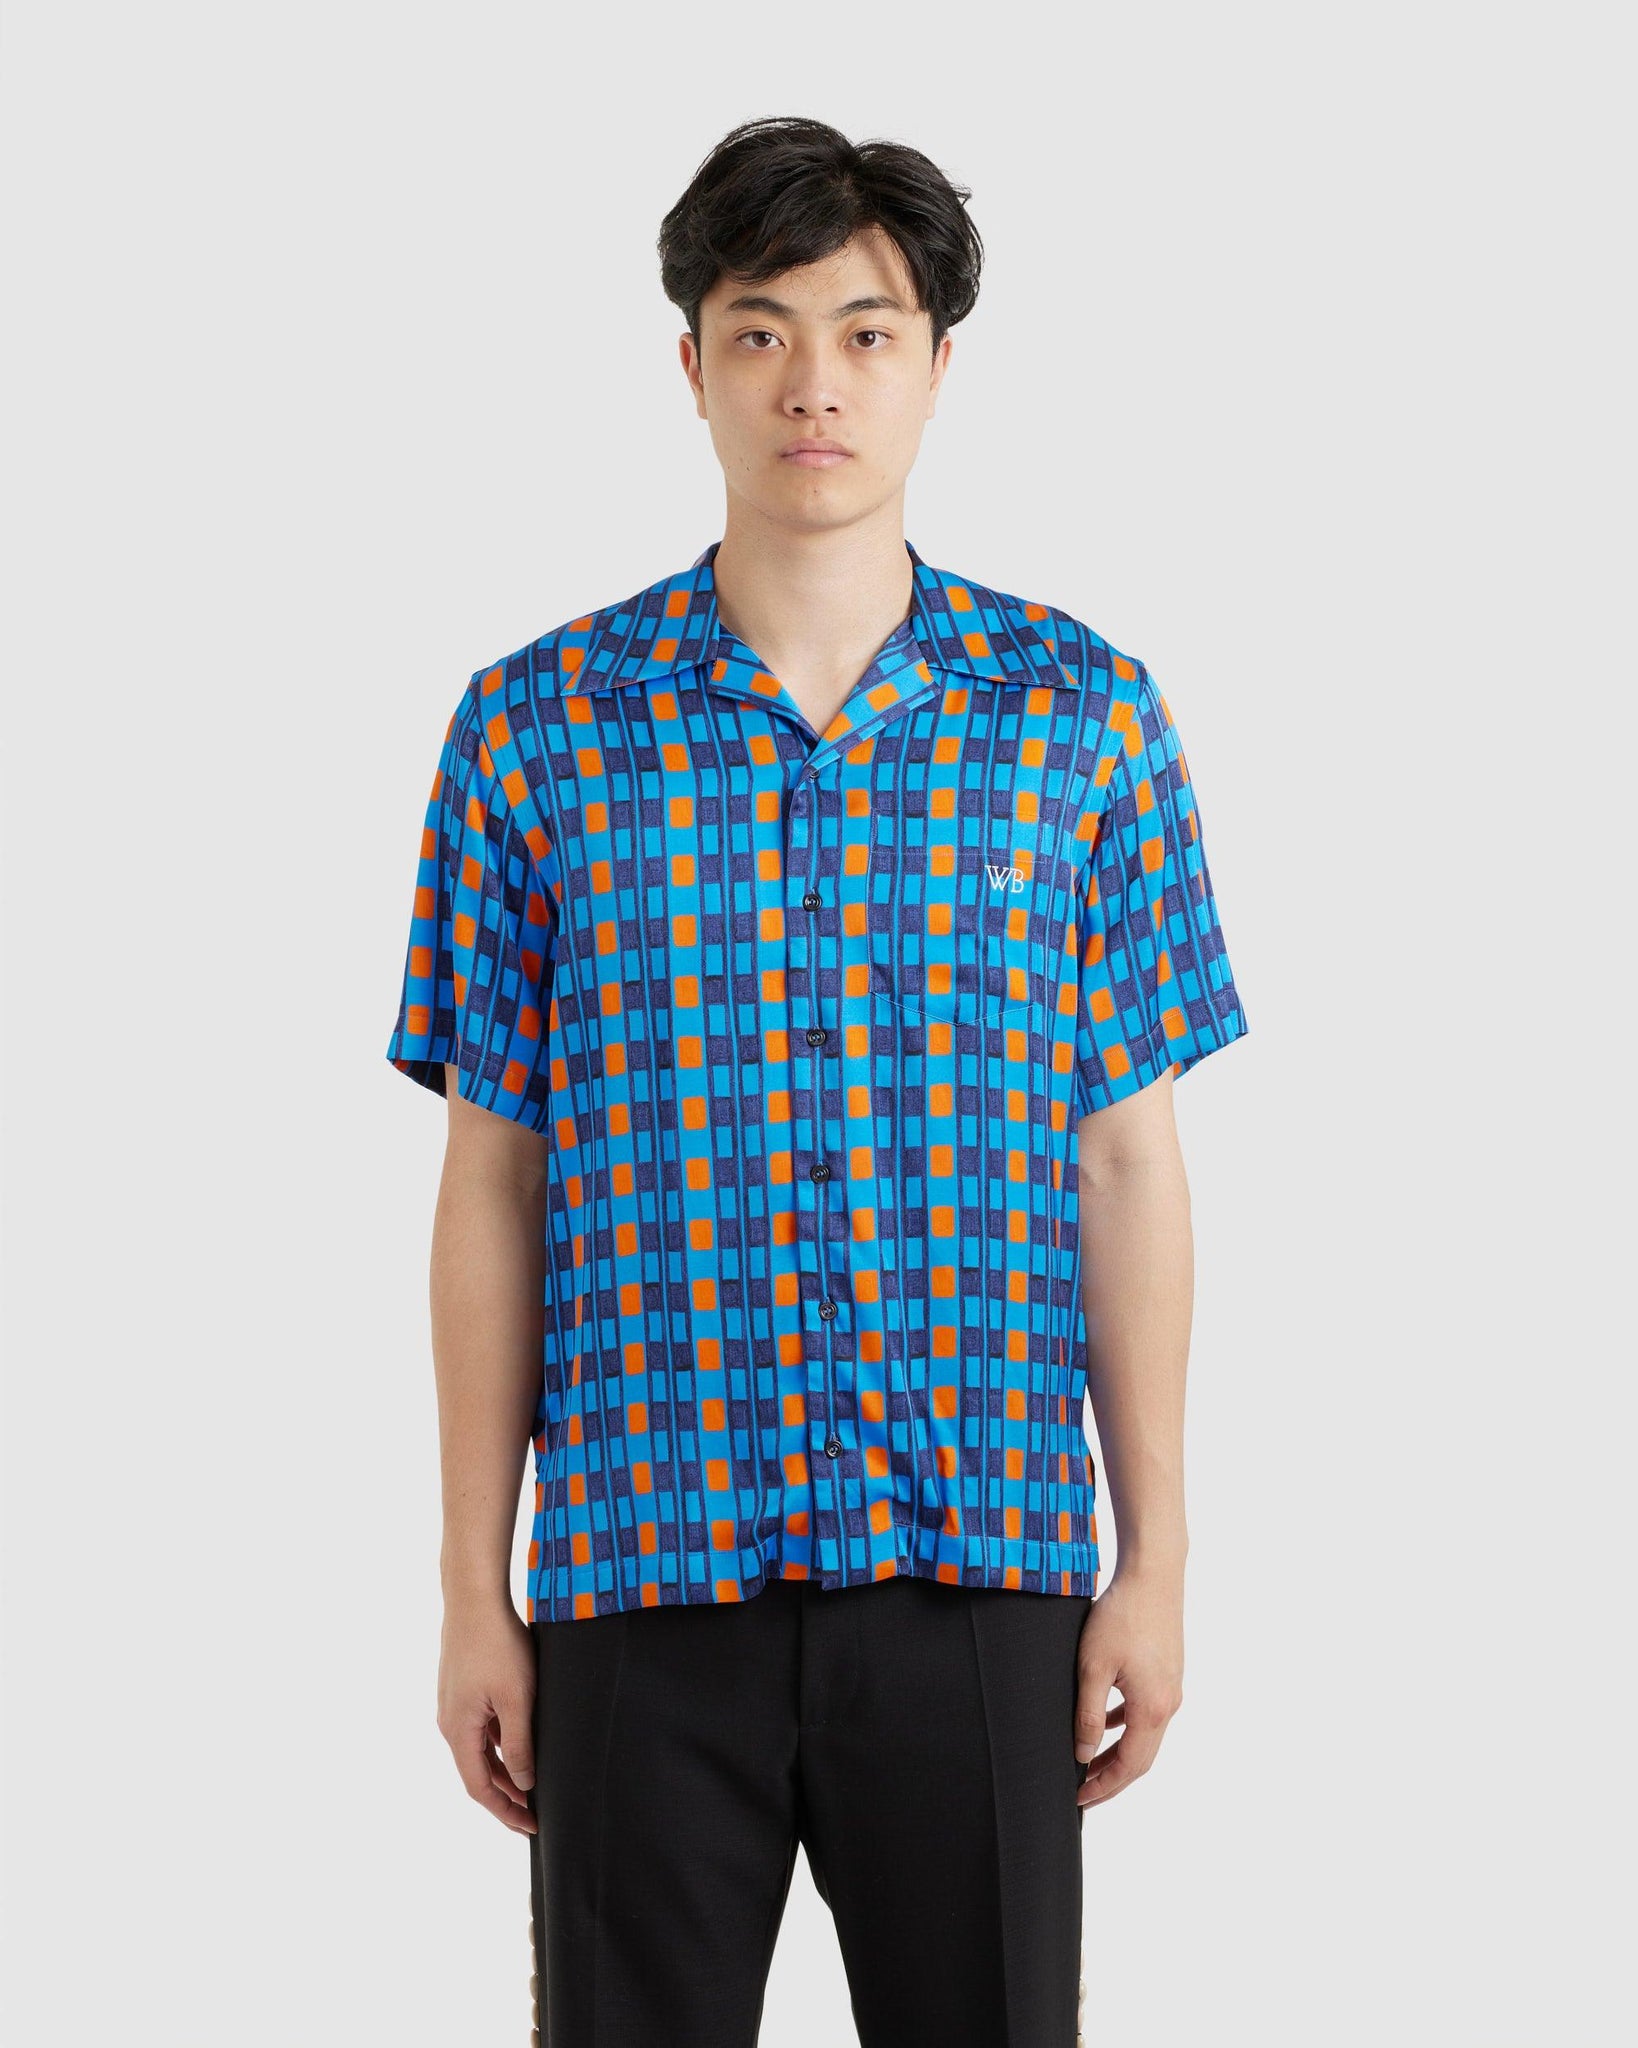 Highlife Bowling Shirt - {{ collection.title }} - Chinatown Country Club 